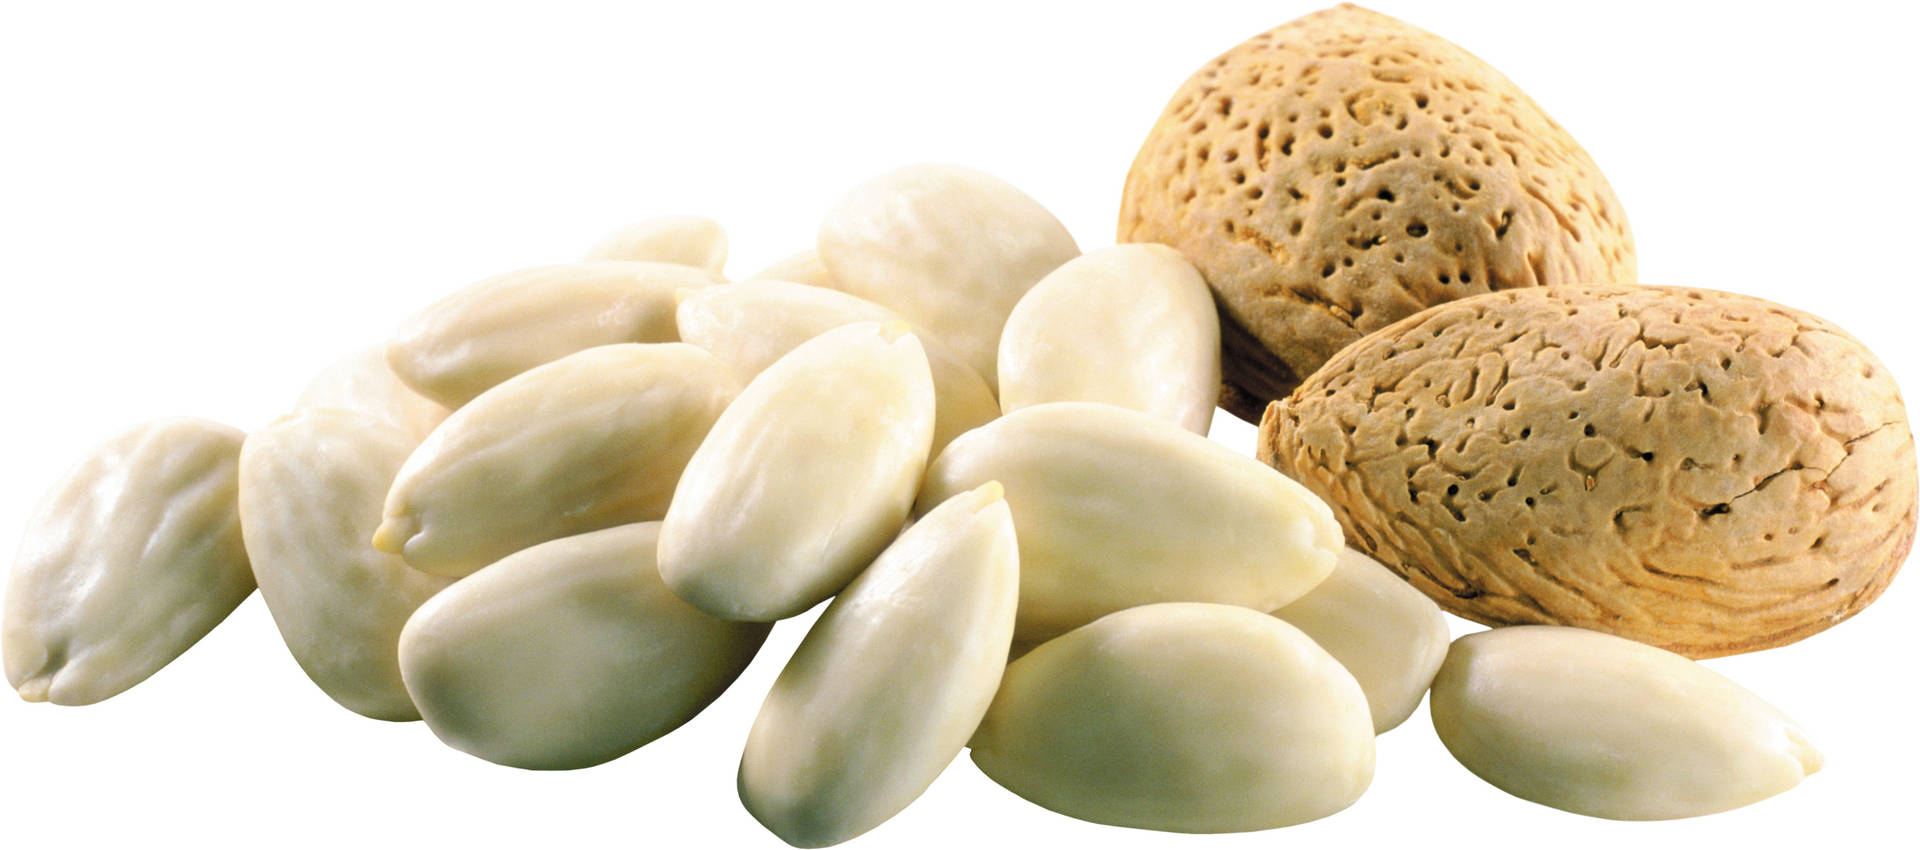 Pearly White Blanched Almonds Wallpaper